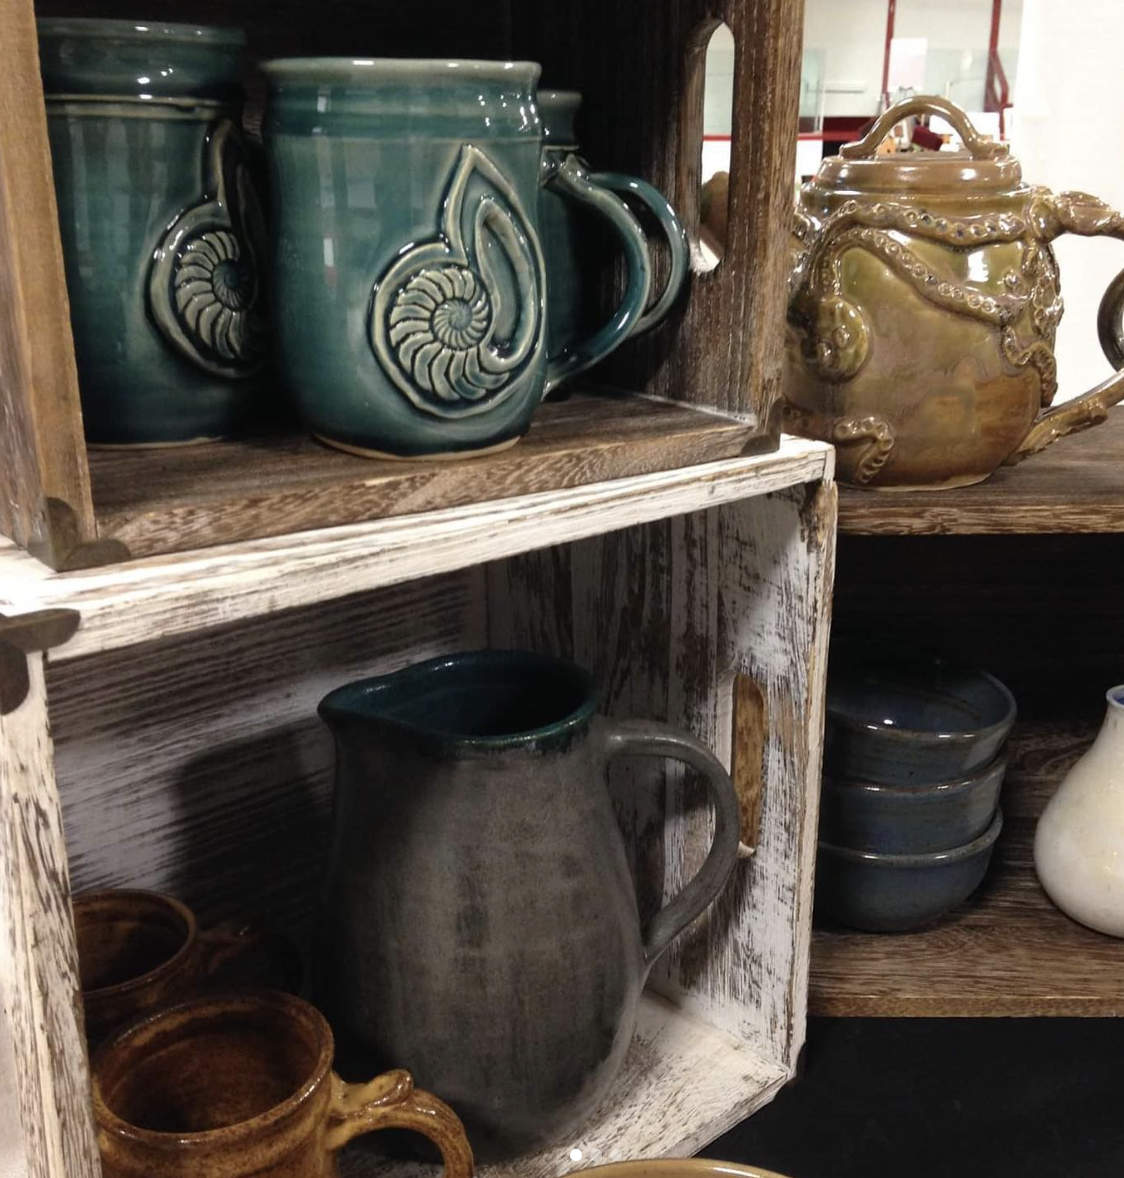 A collection of well-made pottery mugs and vases and bowls.